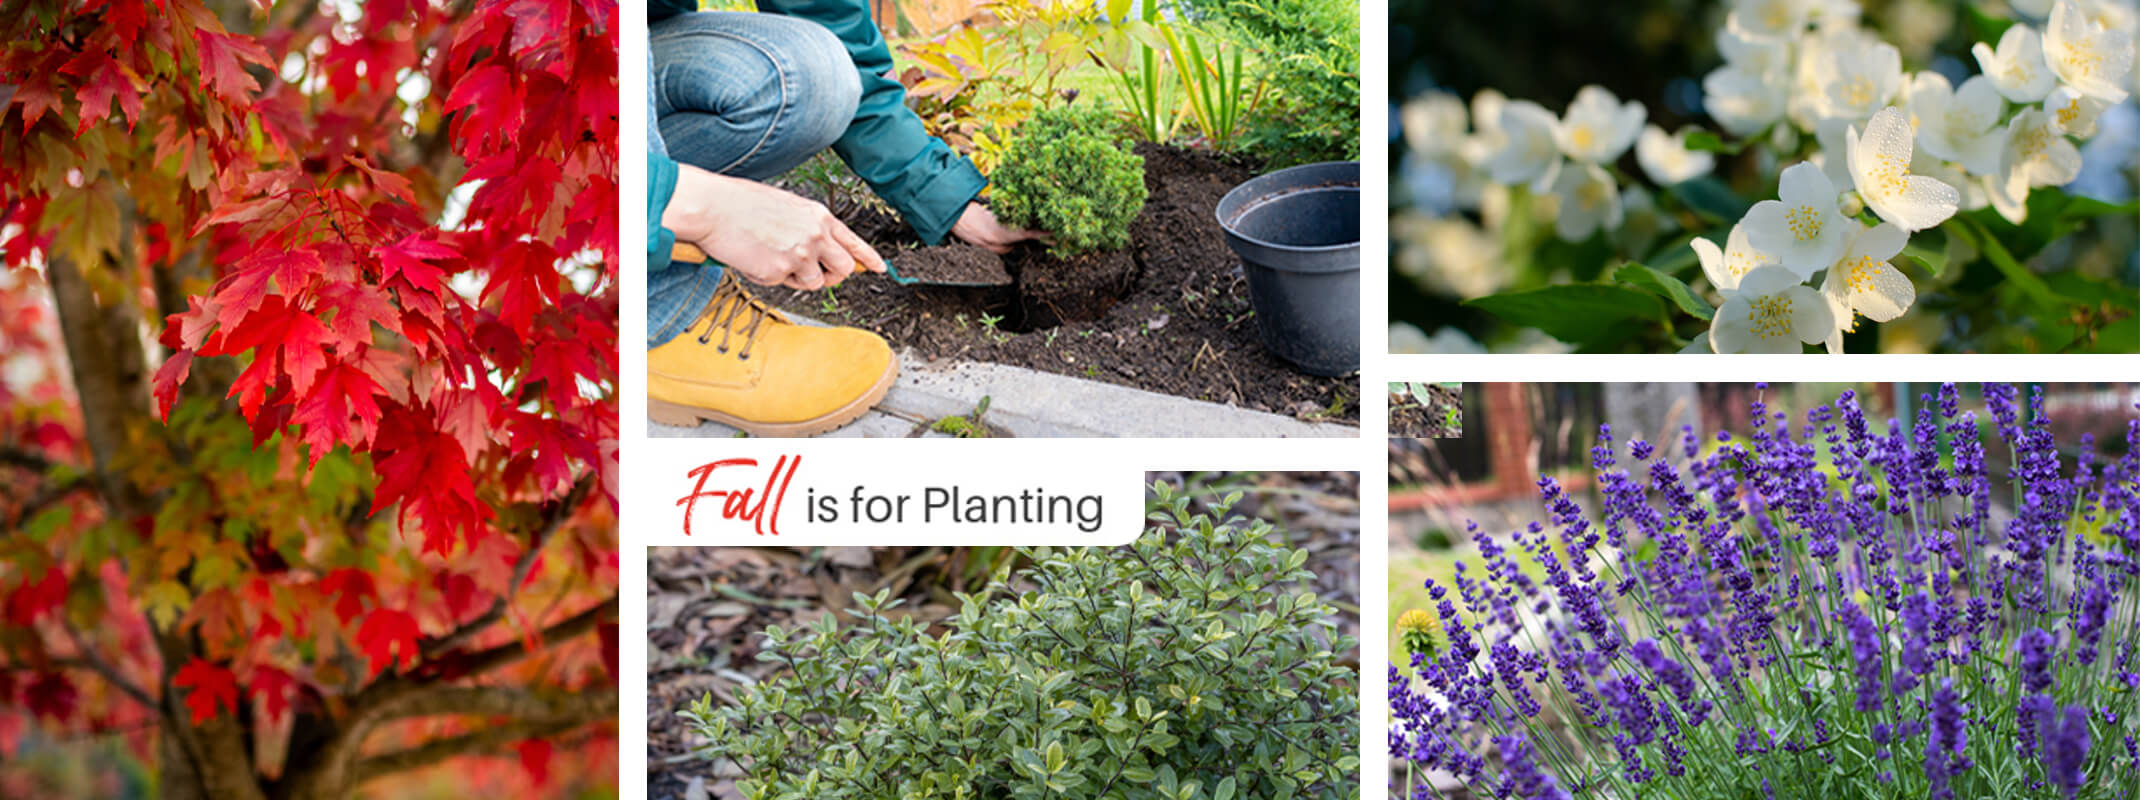 fall is for planting showing images of trees, shrubs and perennials and someone planting